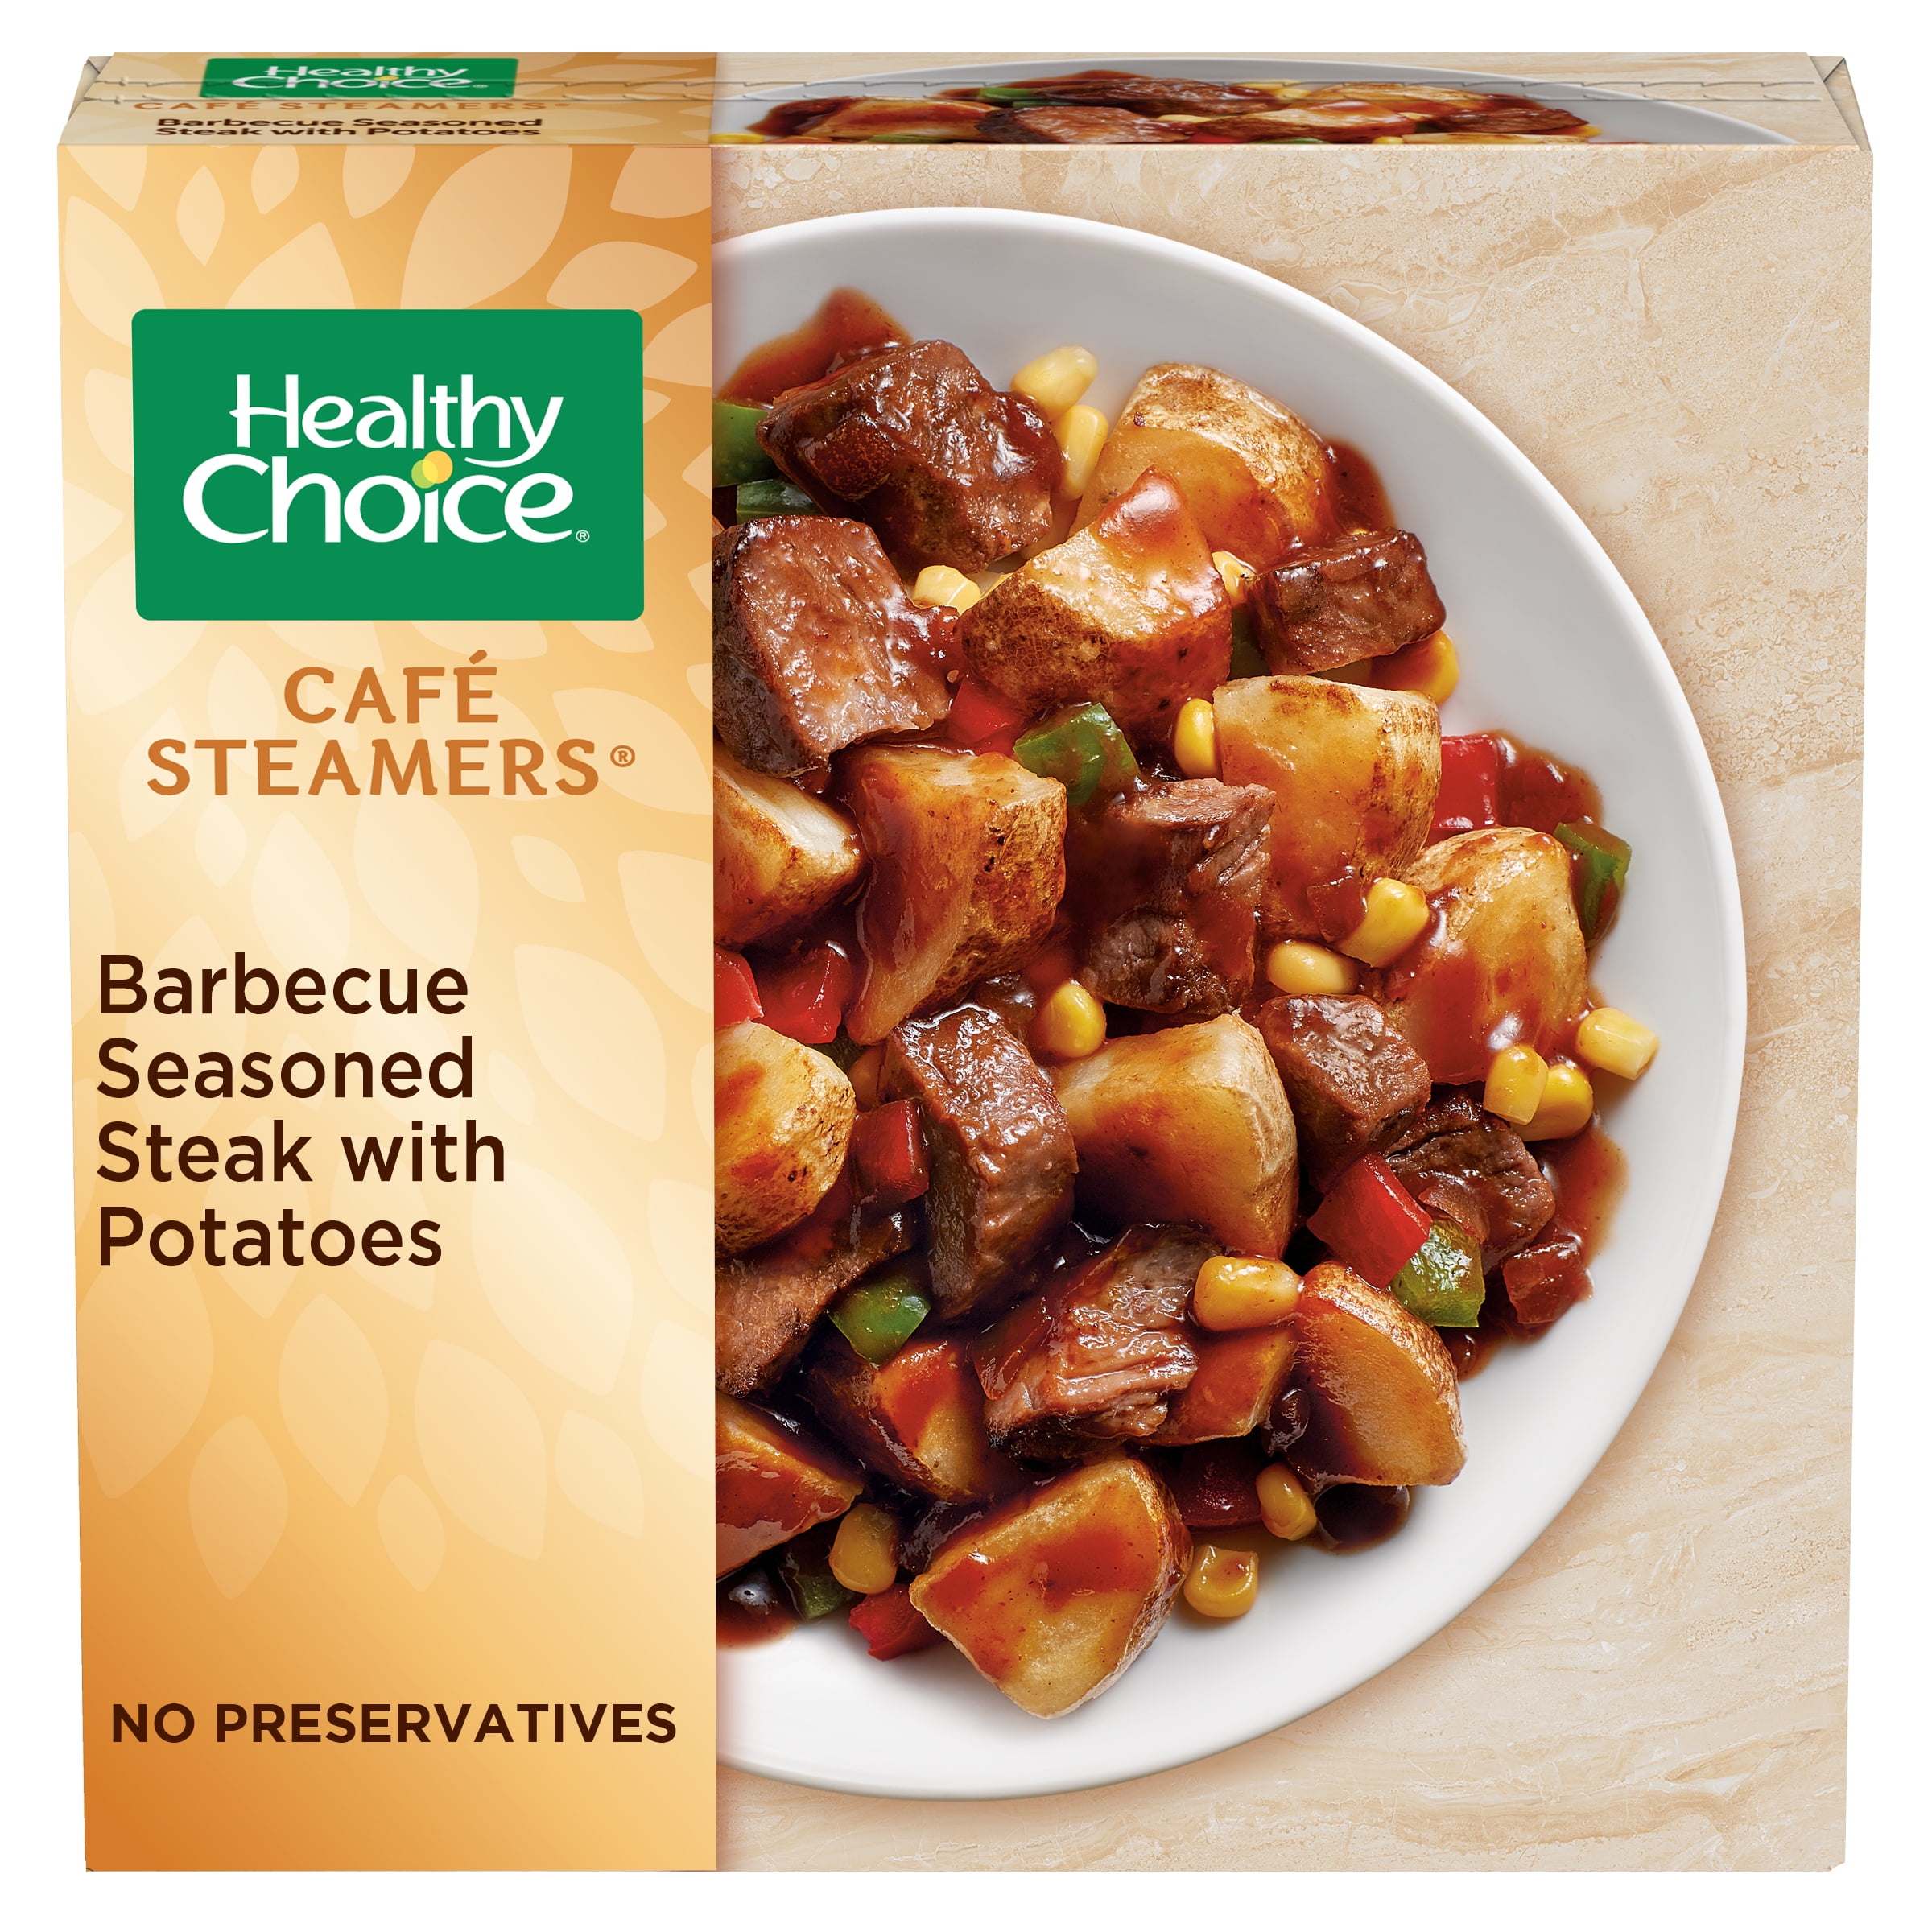 Healthy Choice Caf Steamers Barbecue Steak Potatoes Frozen Meal, 9.5 oz.